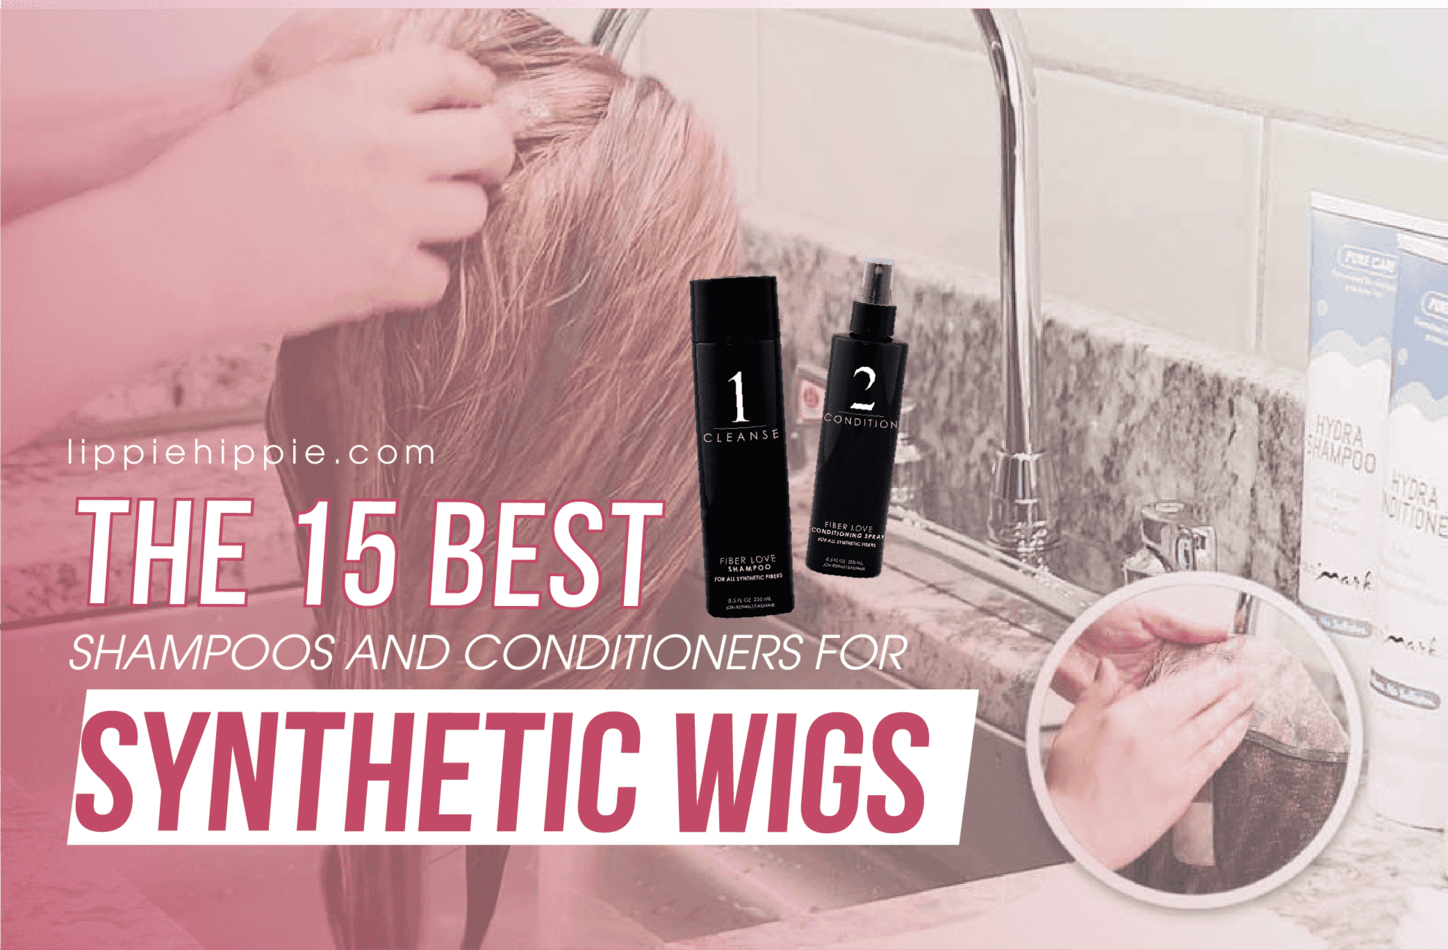 Best Shampoo and Conditioner for Synthetic Wigs